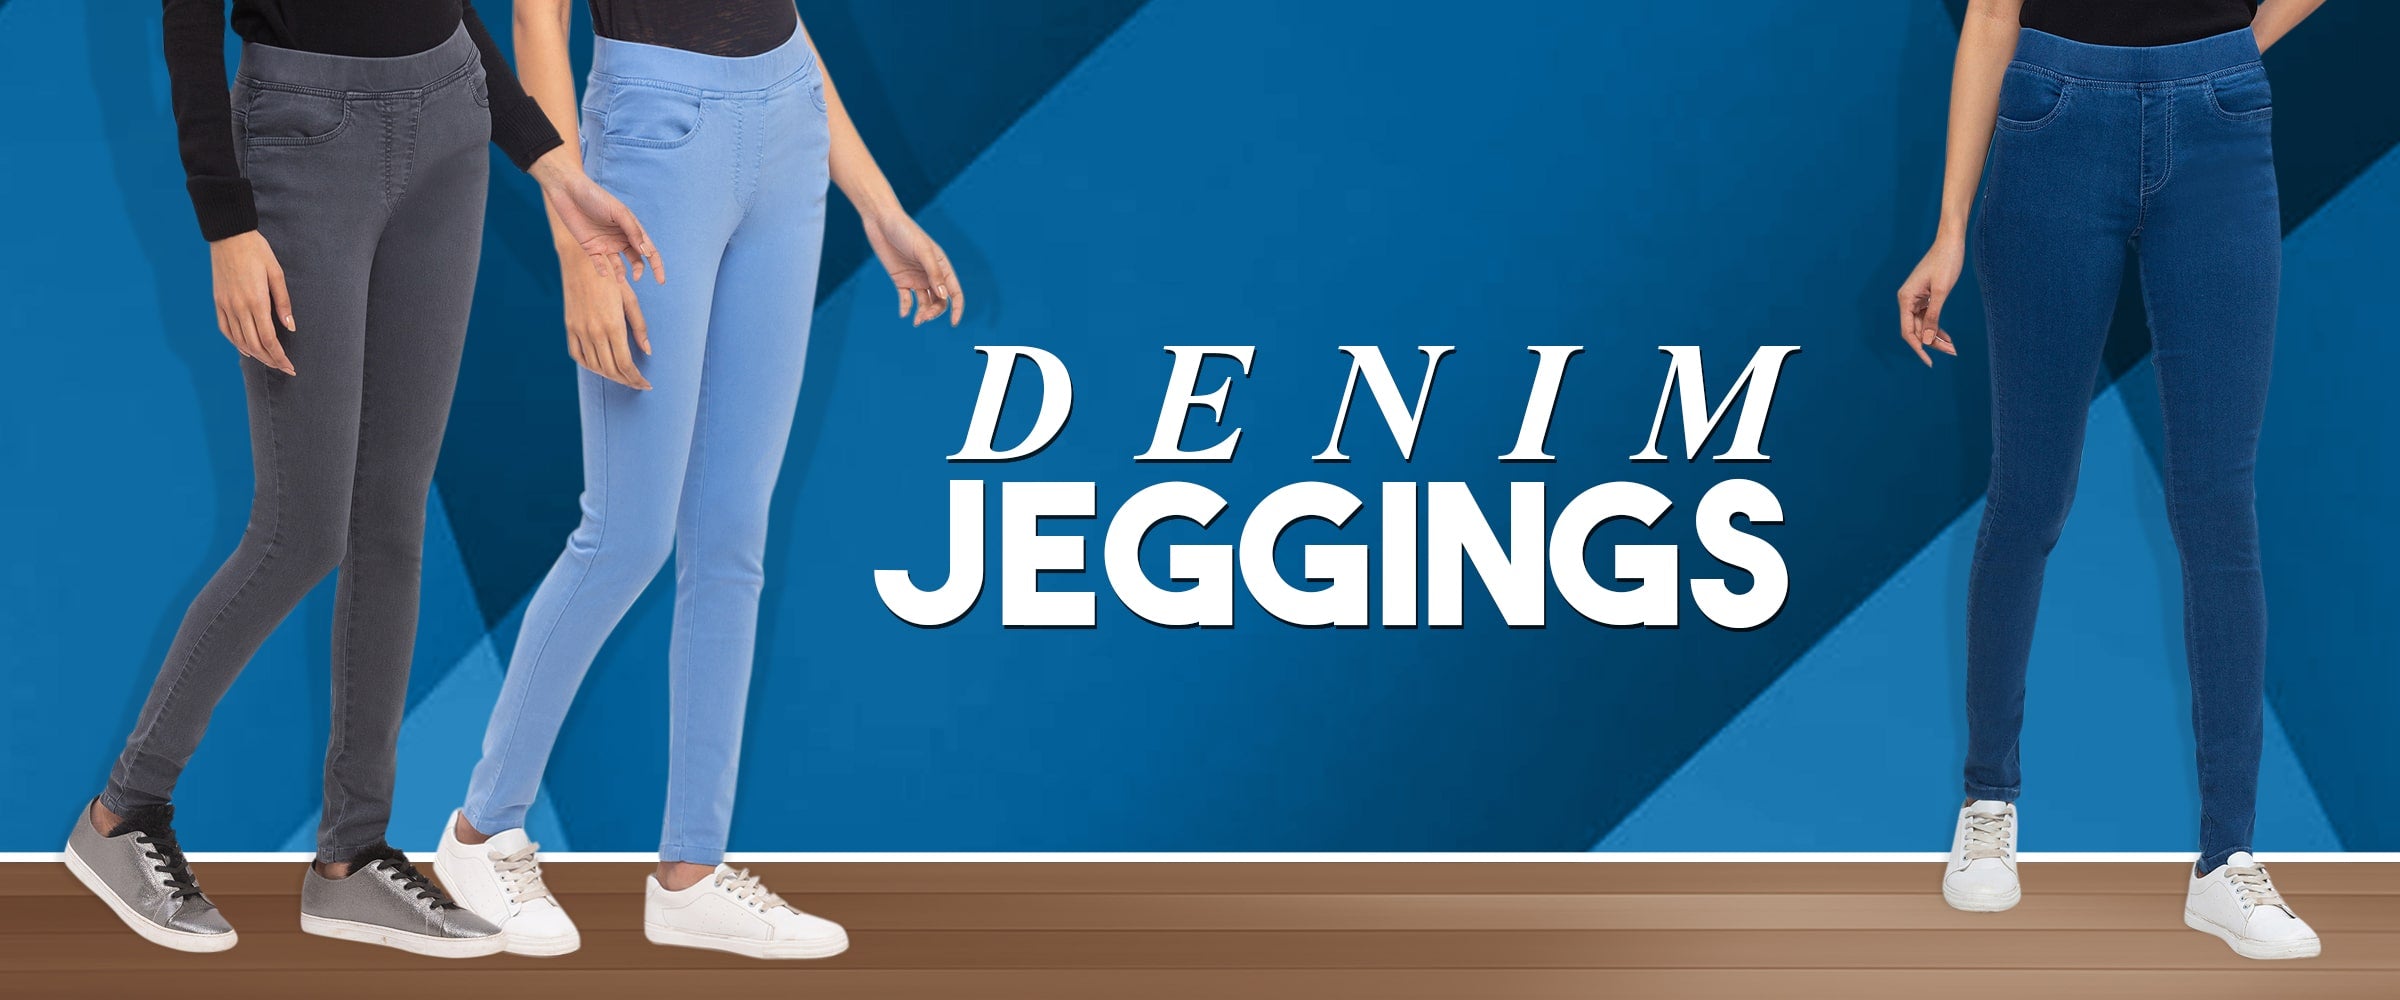 12 Reasons Why Jeggings are More Comfortable than Jeans